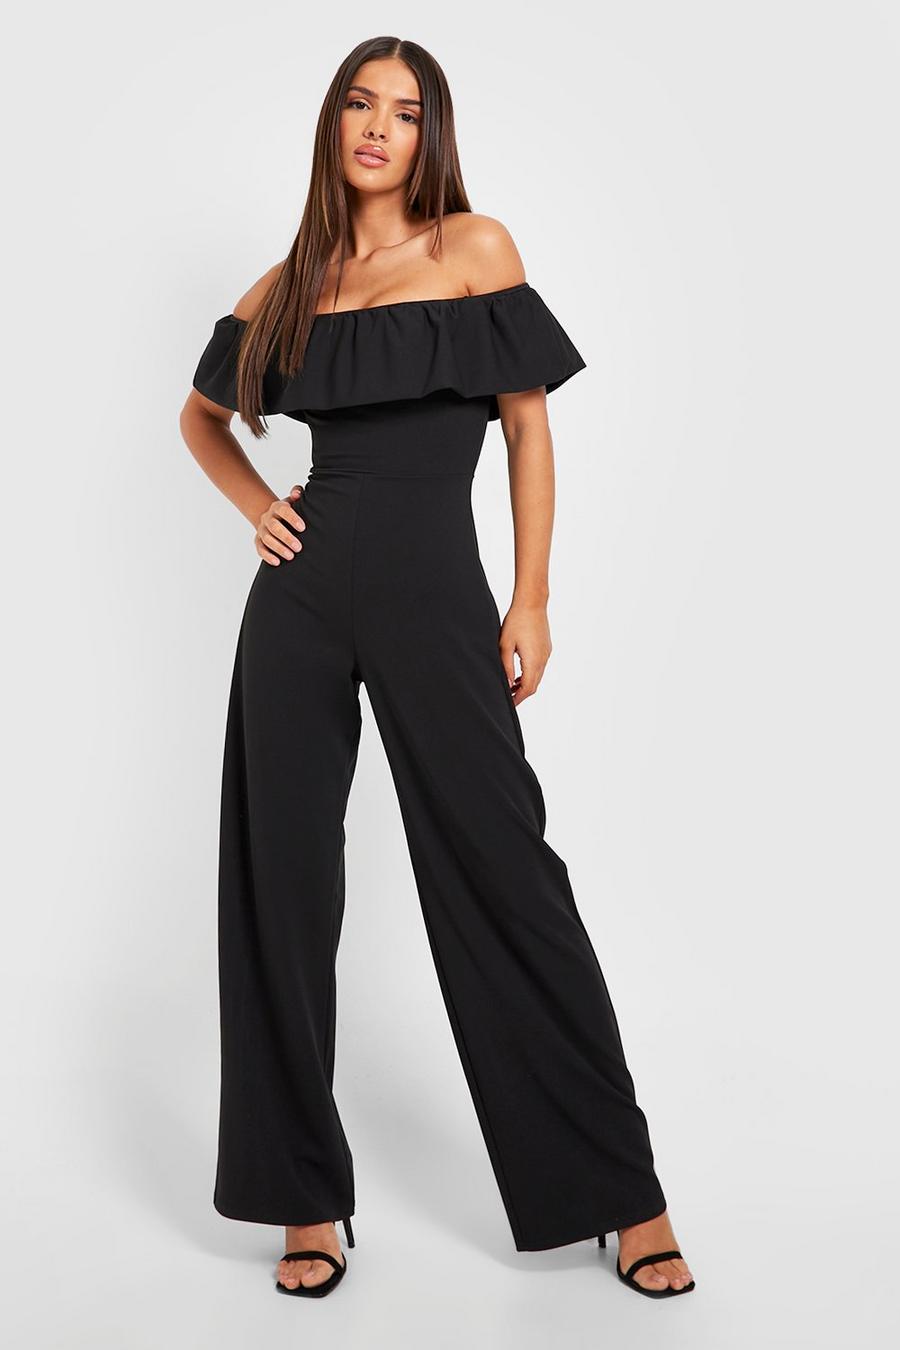 Womens Clothing Jumpsuits and rompers Playsuits Boohoo Satin Bardot Frill Romper in Black 